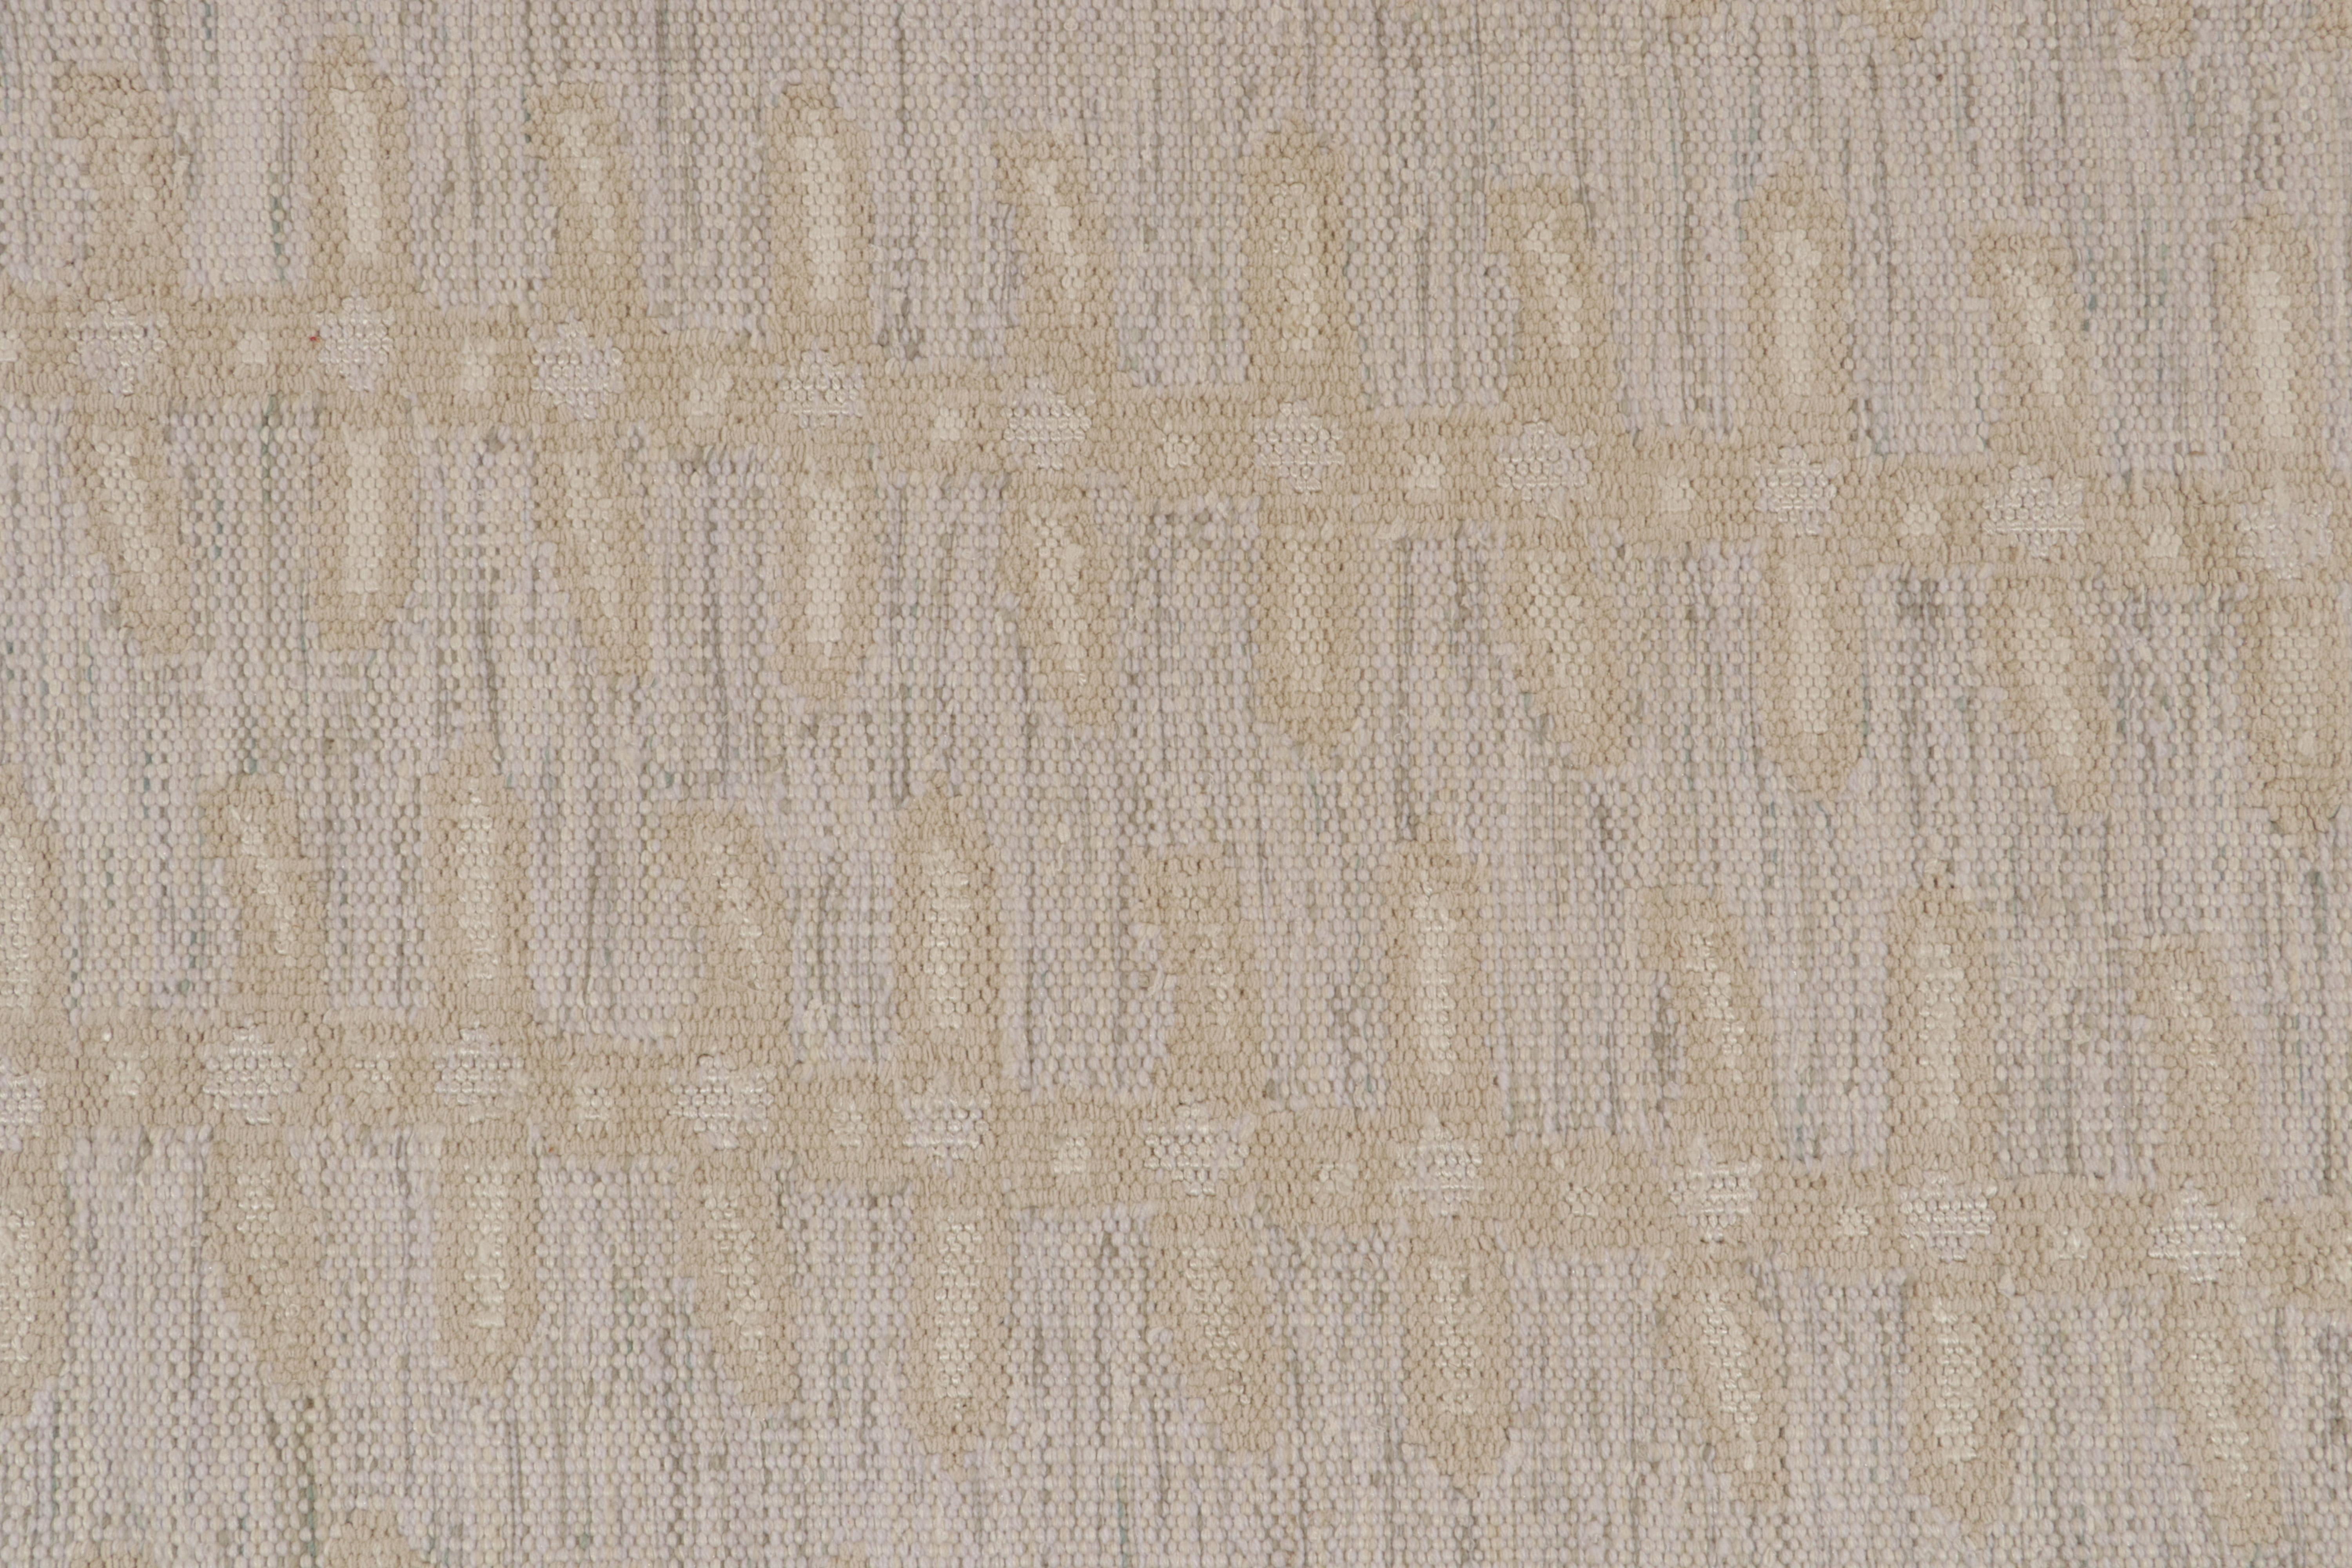 Rug & Kilim’s Scandinavian Style Kilim in Off-White, Grey and Beige Patterns In New Condition For Sale In Long Island City, NY